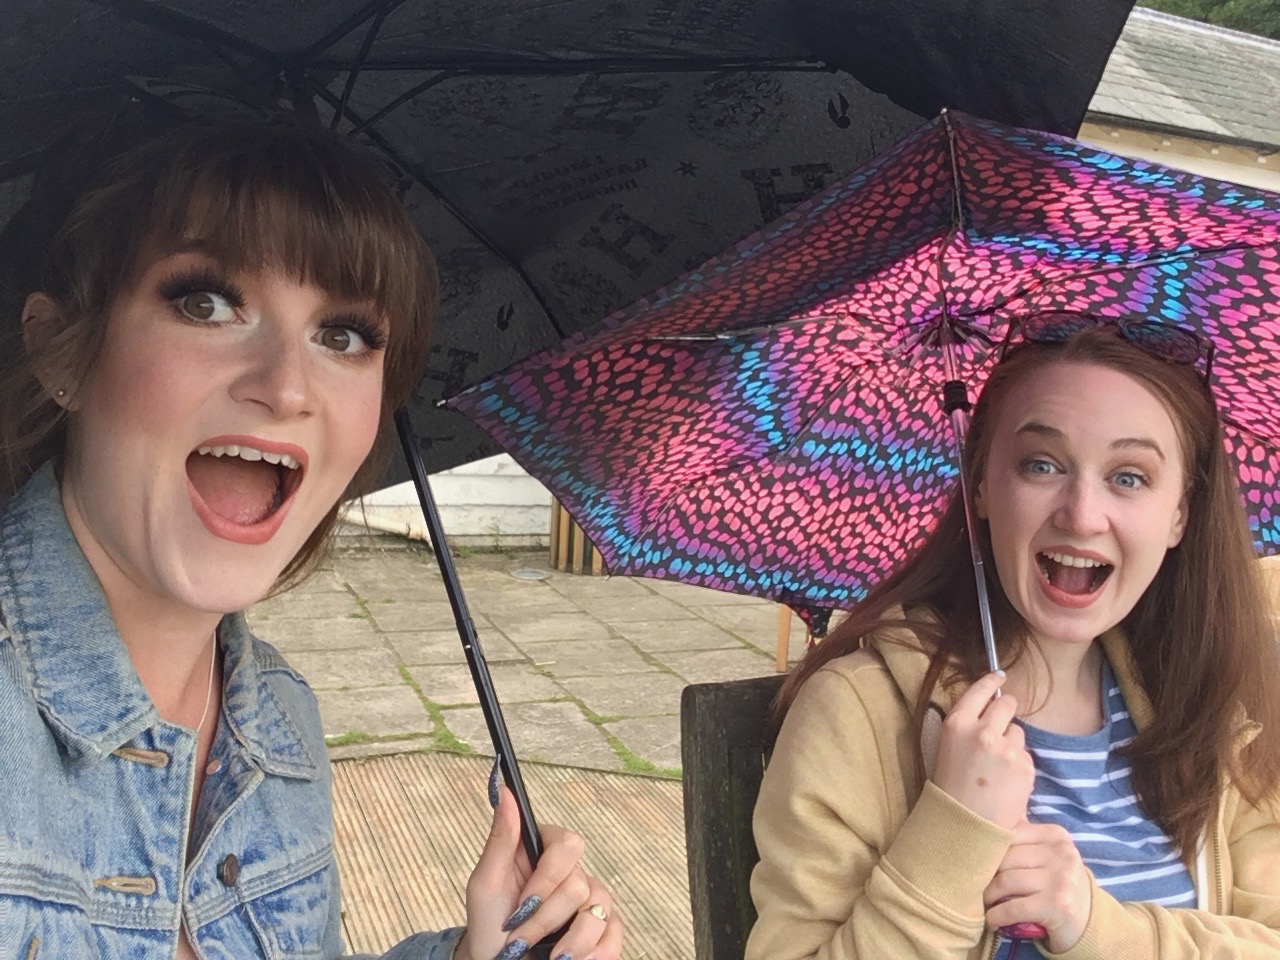 selfie of pippa and izzy both holding colourful umbrellas and pulling faces